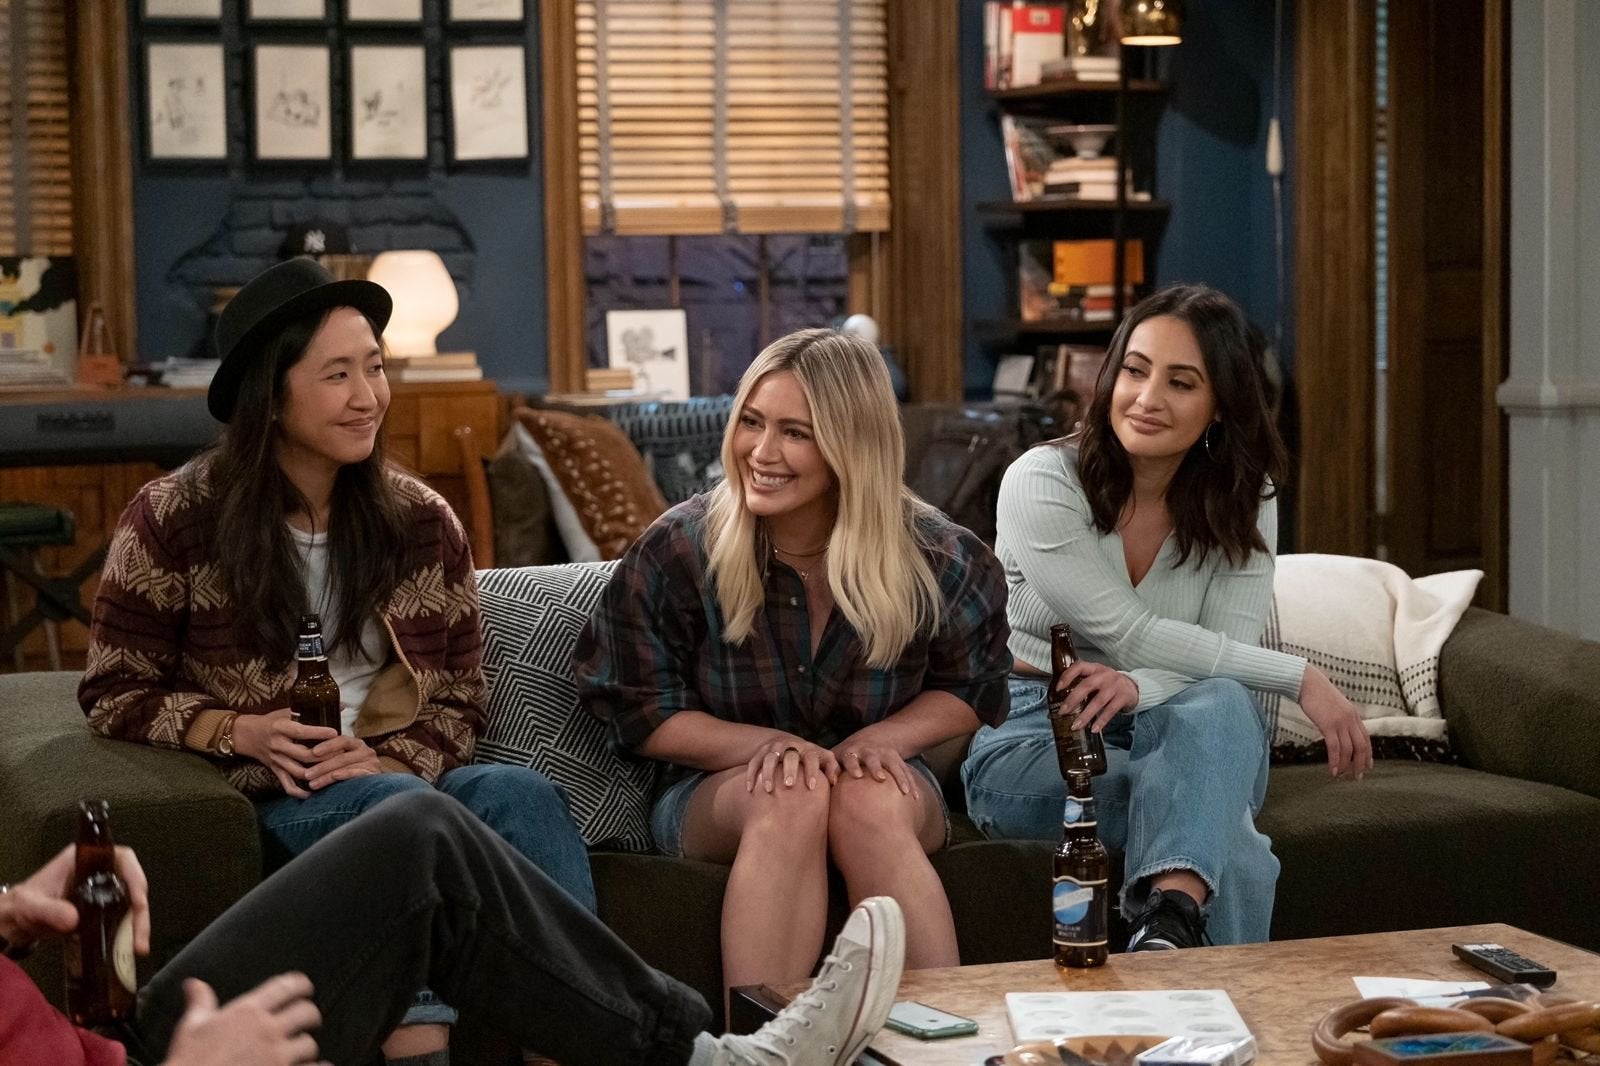 How I Met Your Father Season 1 Episode 3 Review: “The Fixer” Might Be Onto Something